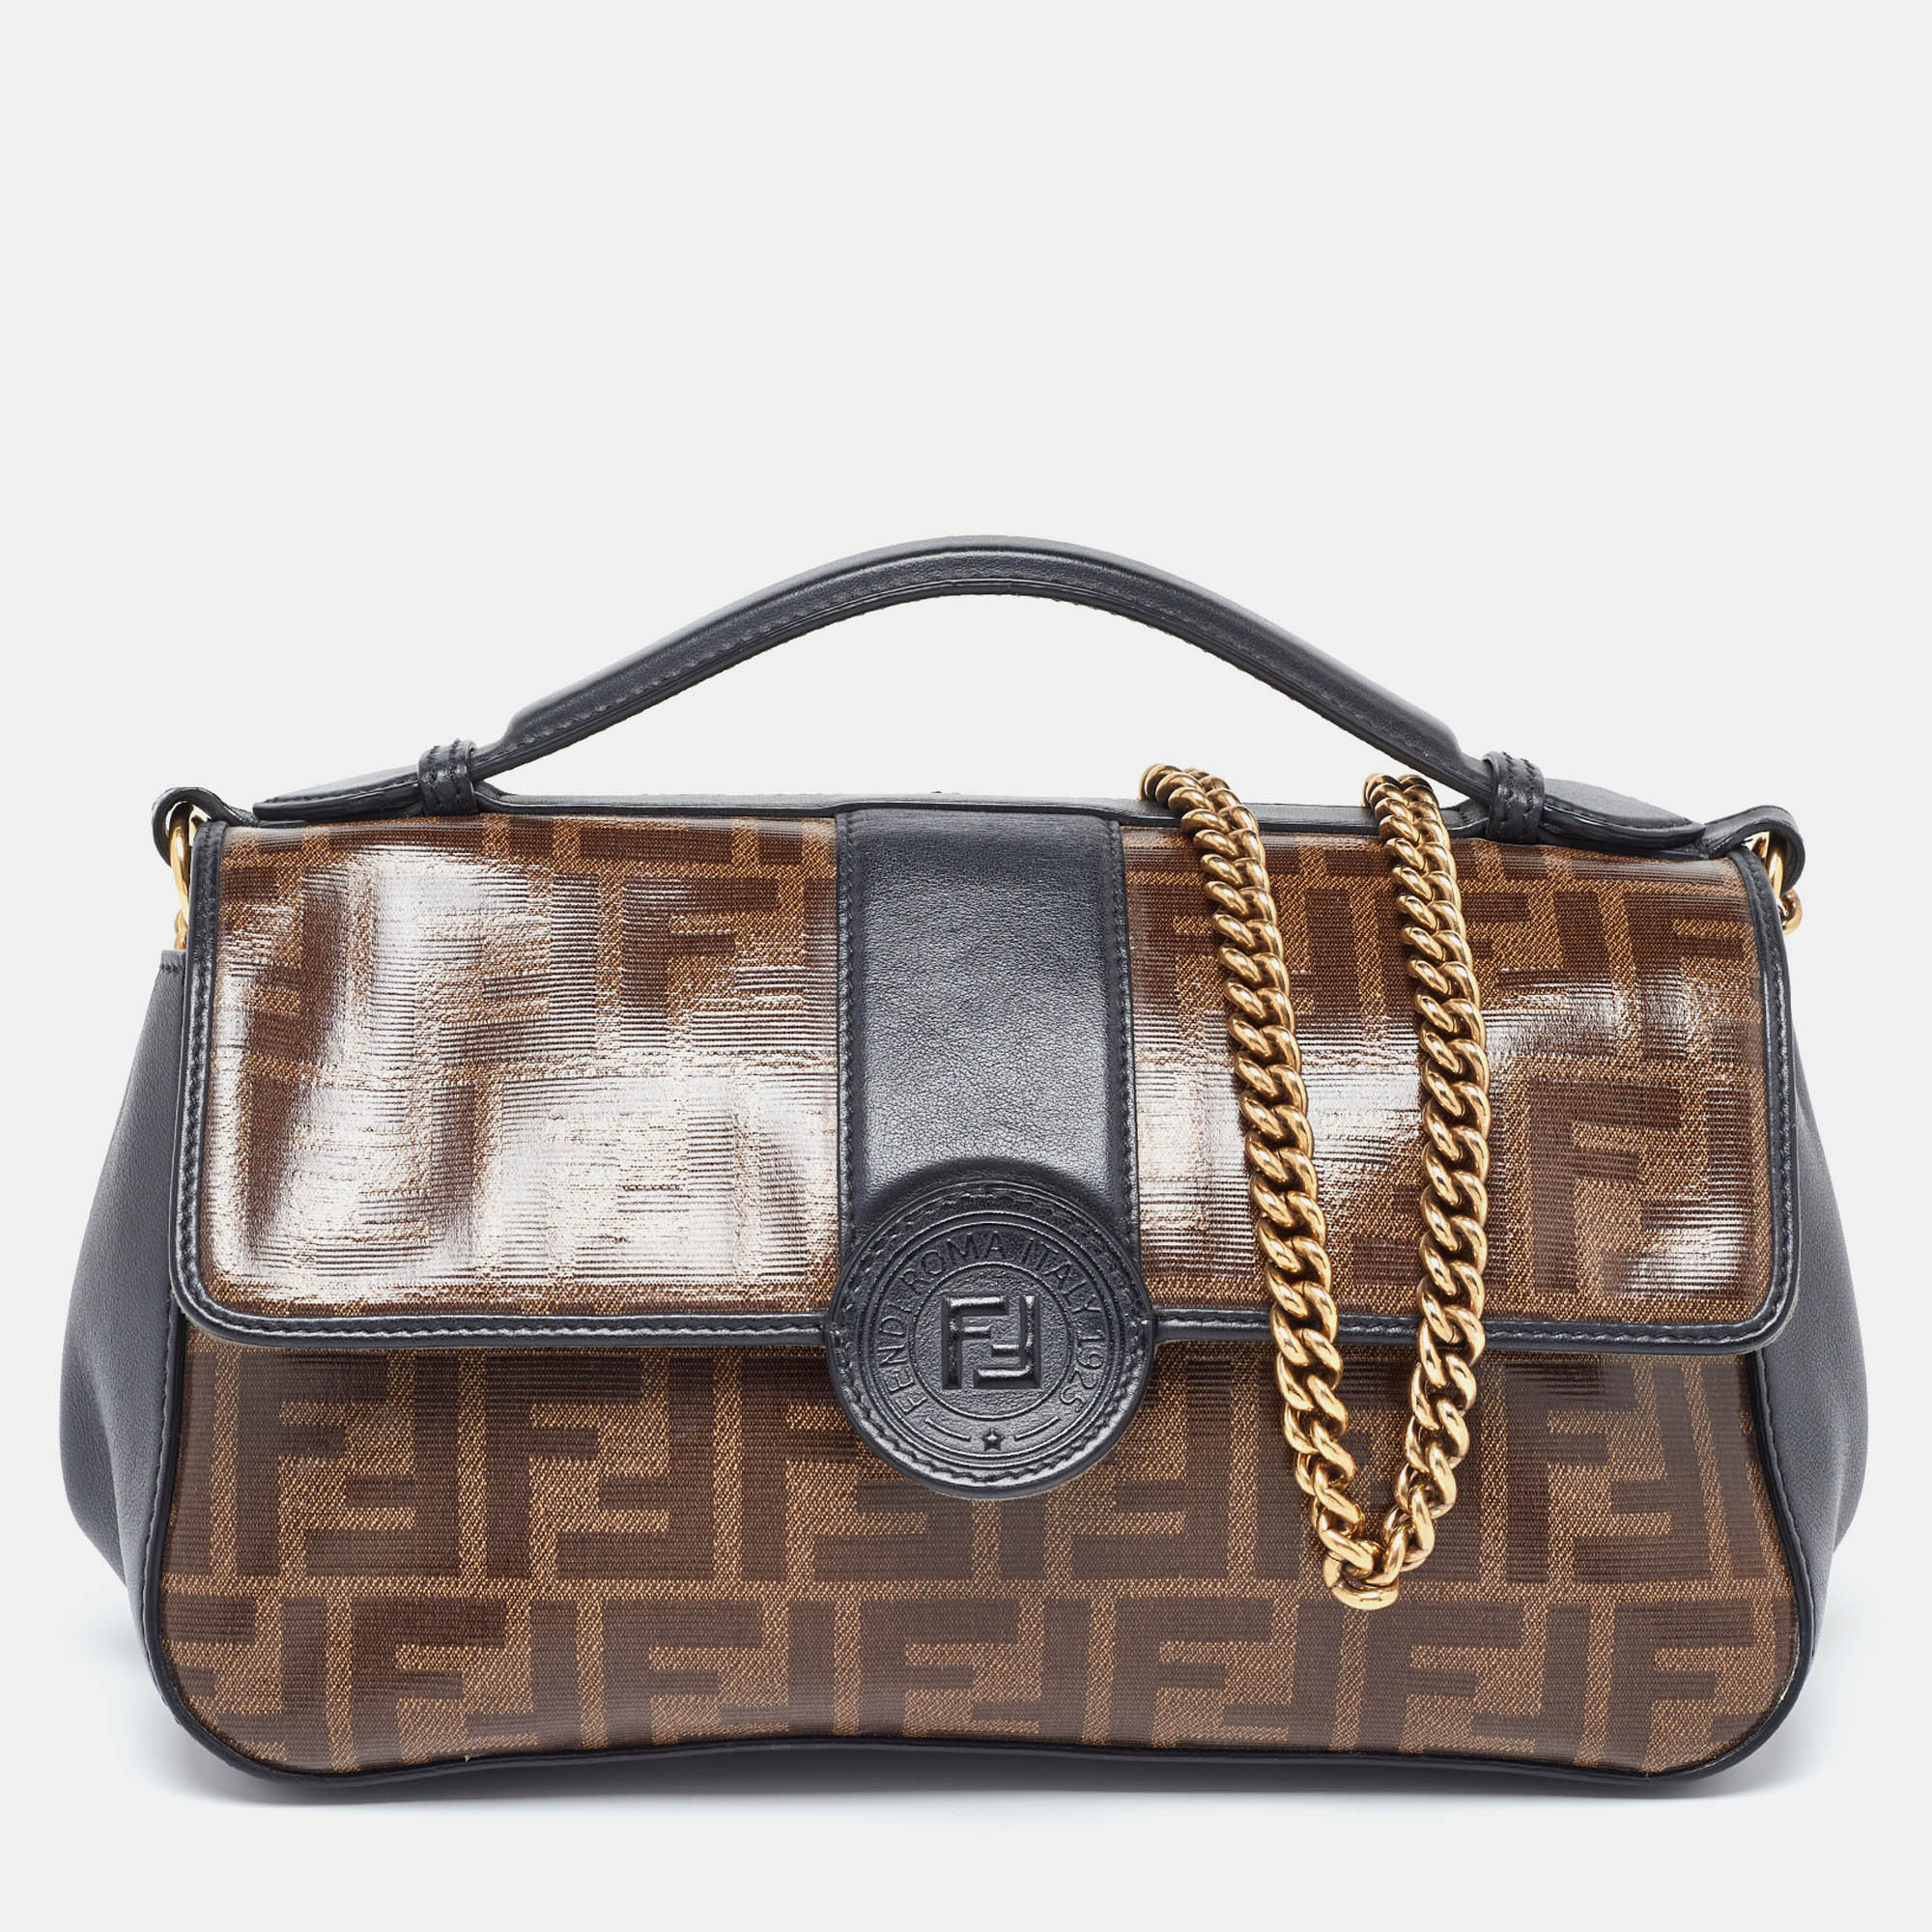 Fendi black/tobacco zucca coated canvas and leather double f top handle bag